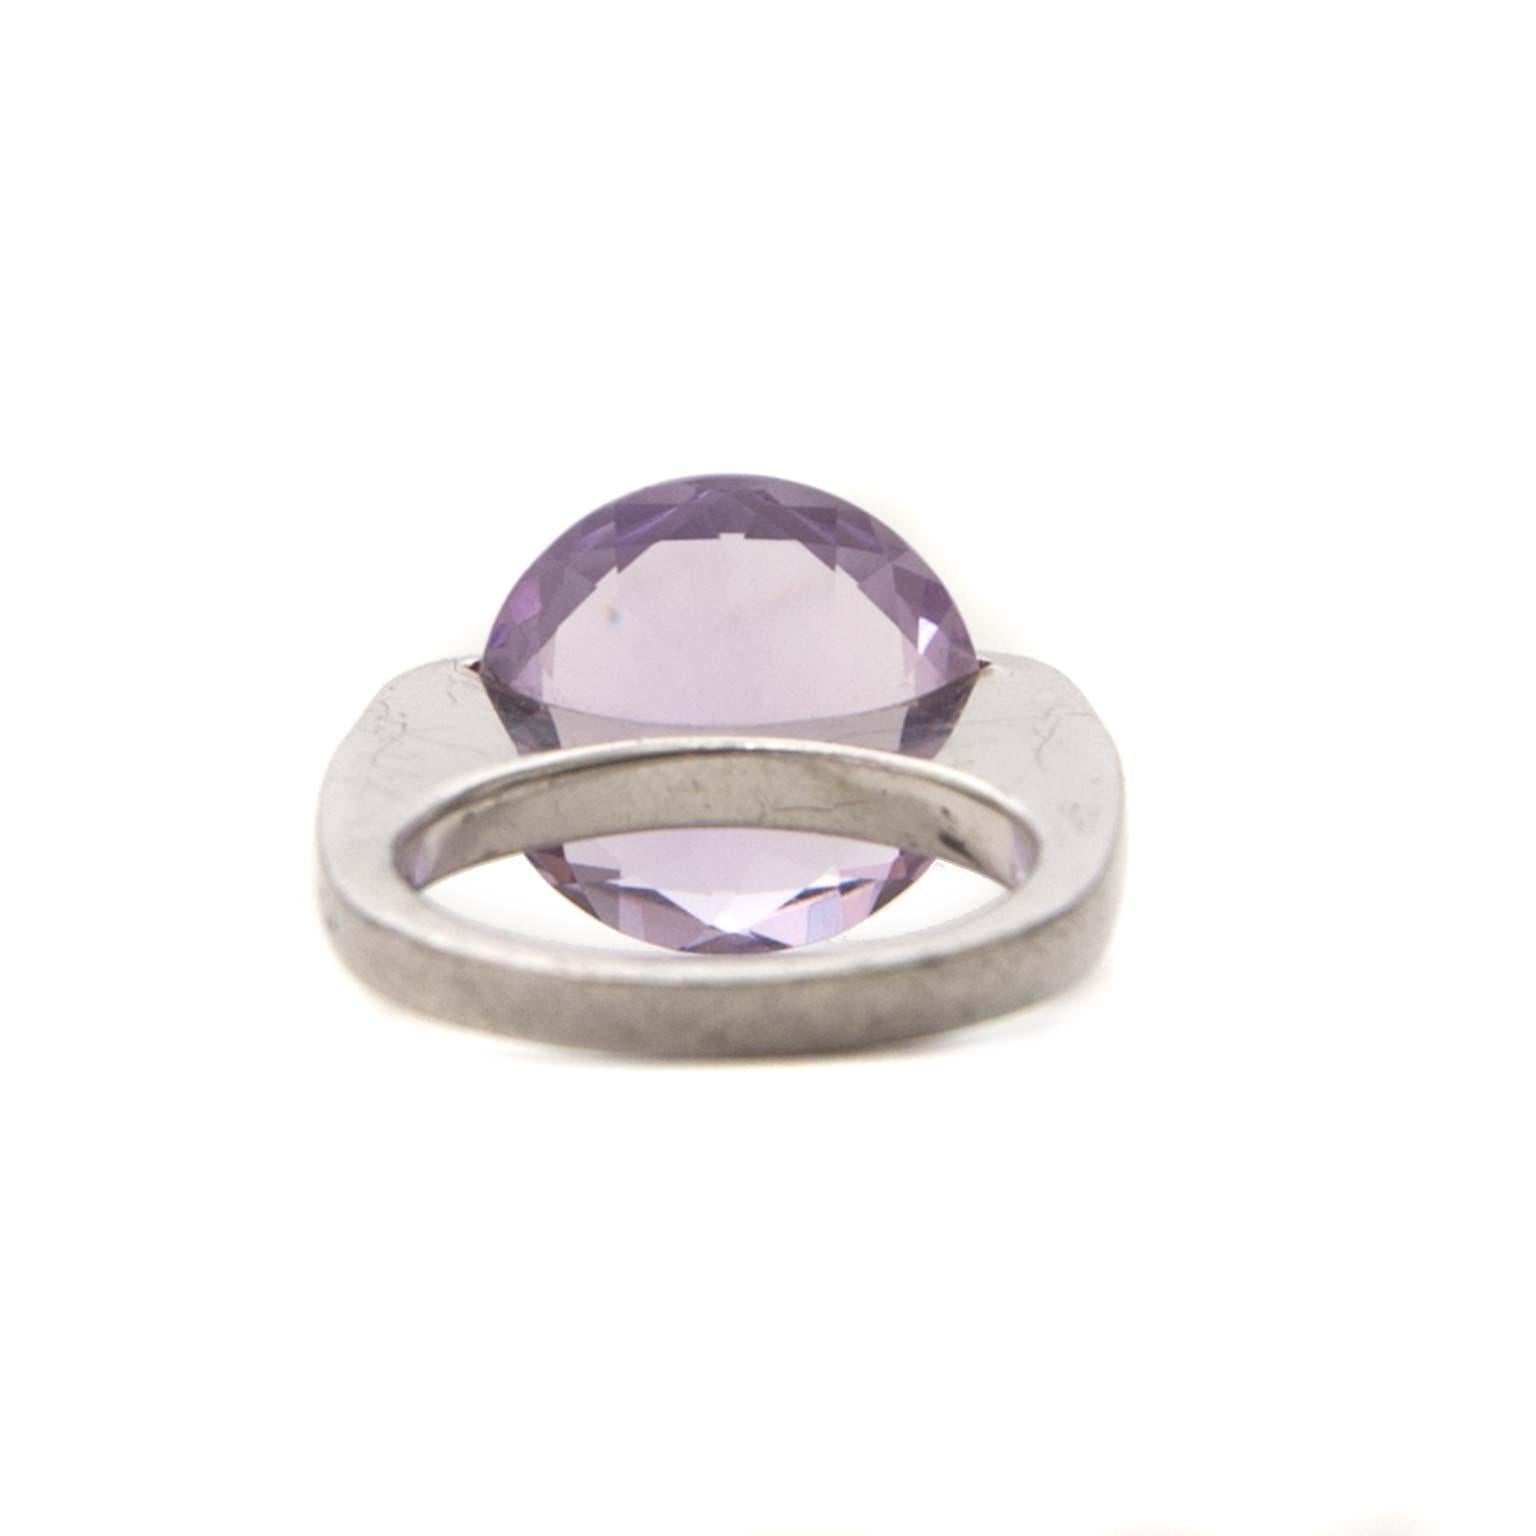 Good preloved condition

Pianegonda Silver Ring With Purple Stone - SIze 52 

This beautiful silver ring by Pianegonda is a true show-stopper. It features a purple stone in the center, and tiny gems on the side.
The perfect ring for those